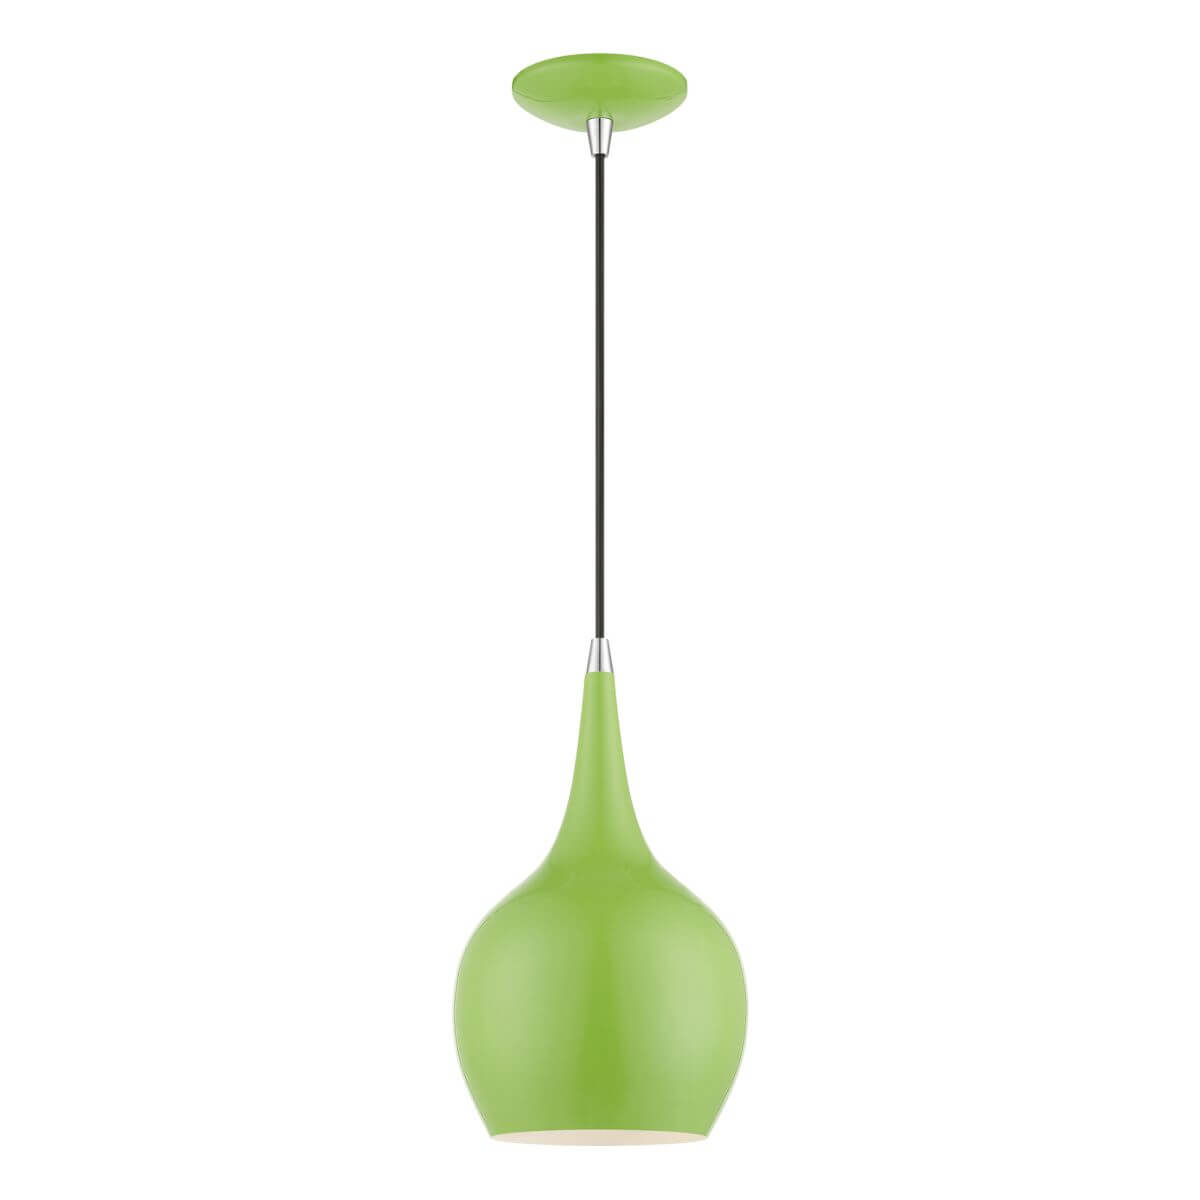 1 Light 8 inch Mini Pendant in Shiny Apple Green-Polished Chrome Accents - 245401